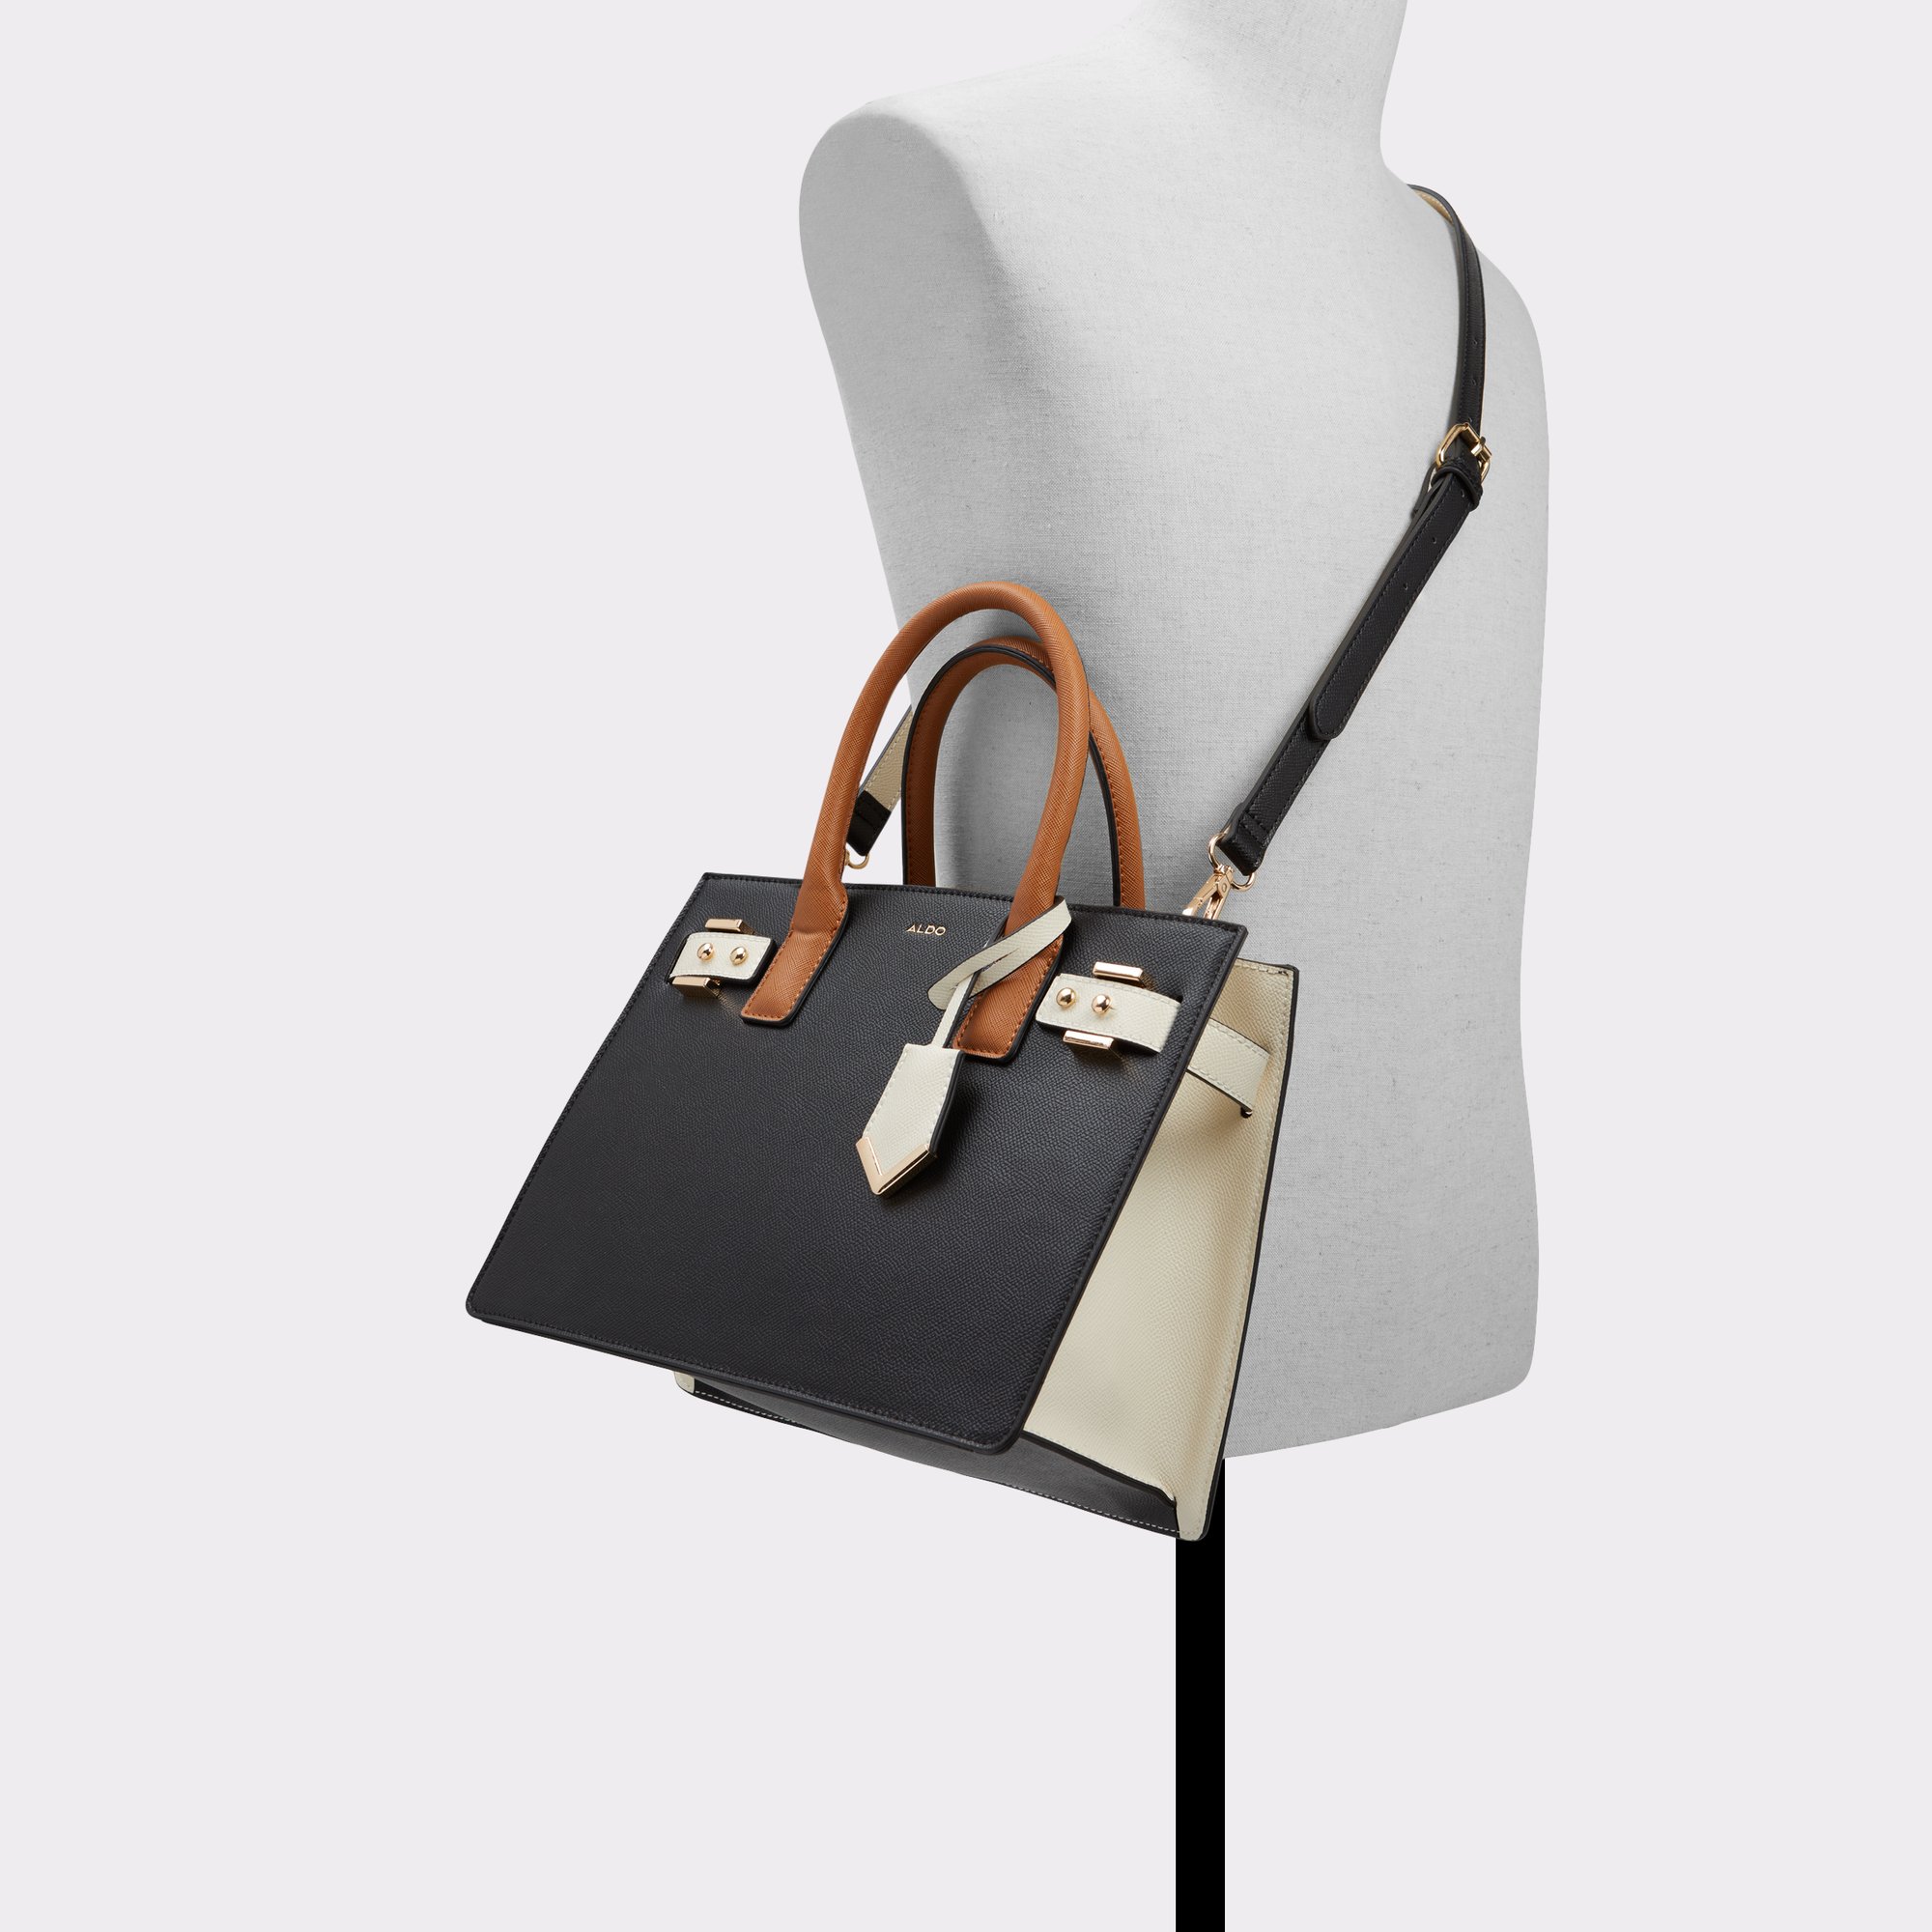 Aldo Bags Shoes & Accessories You'll Love